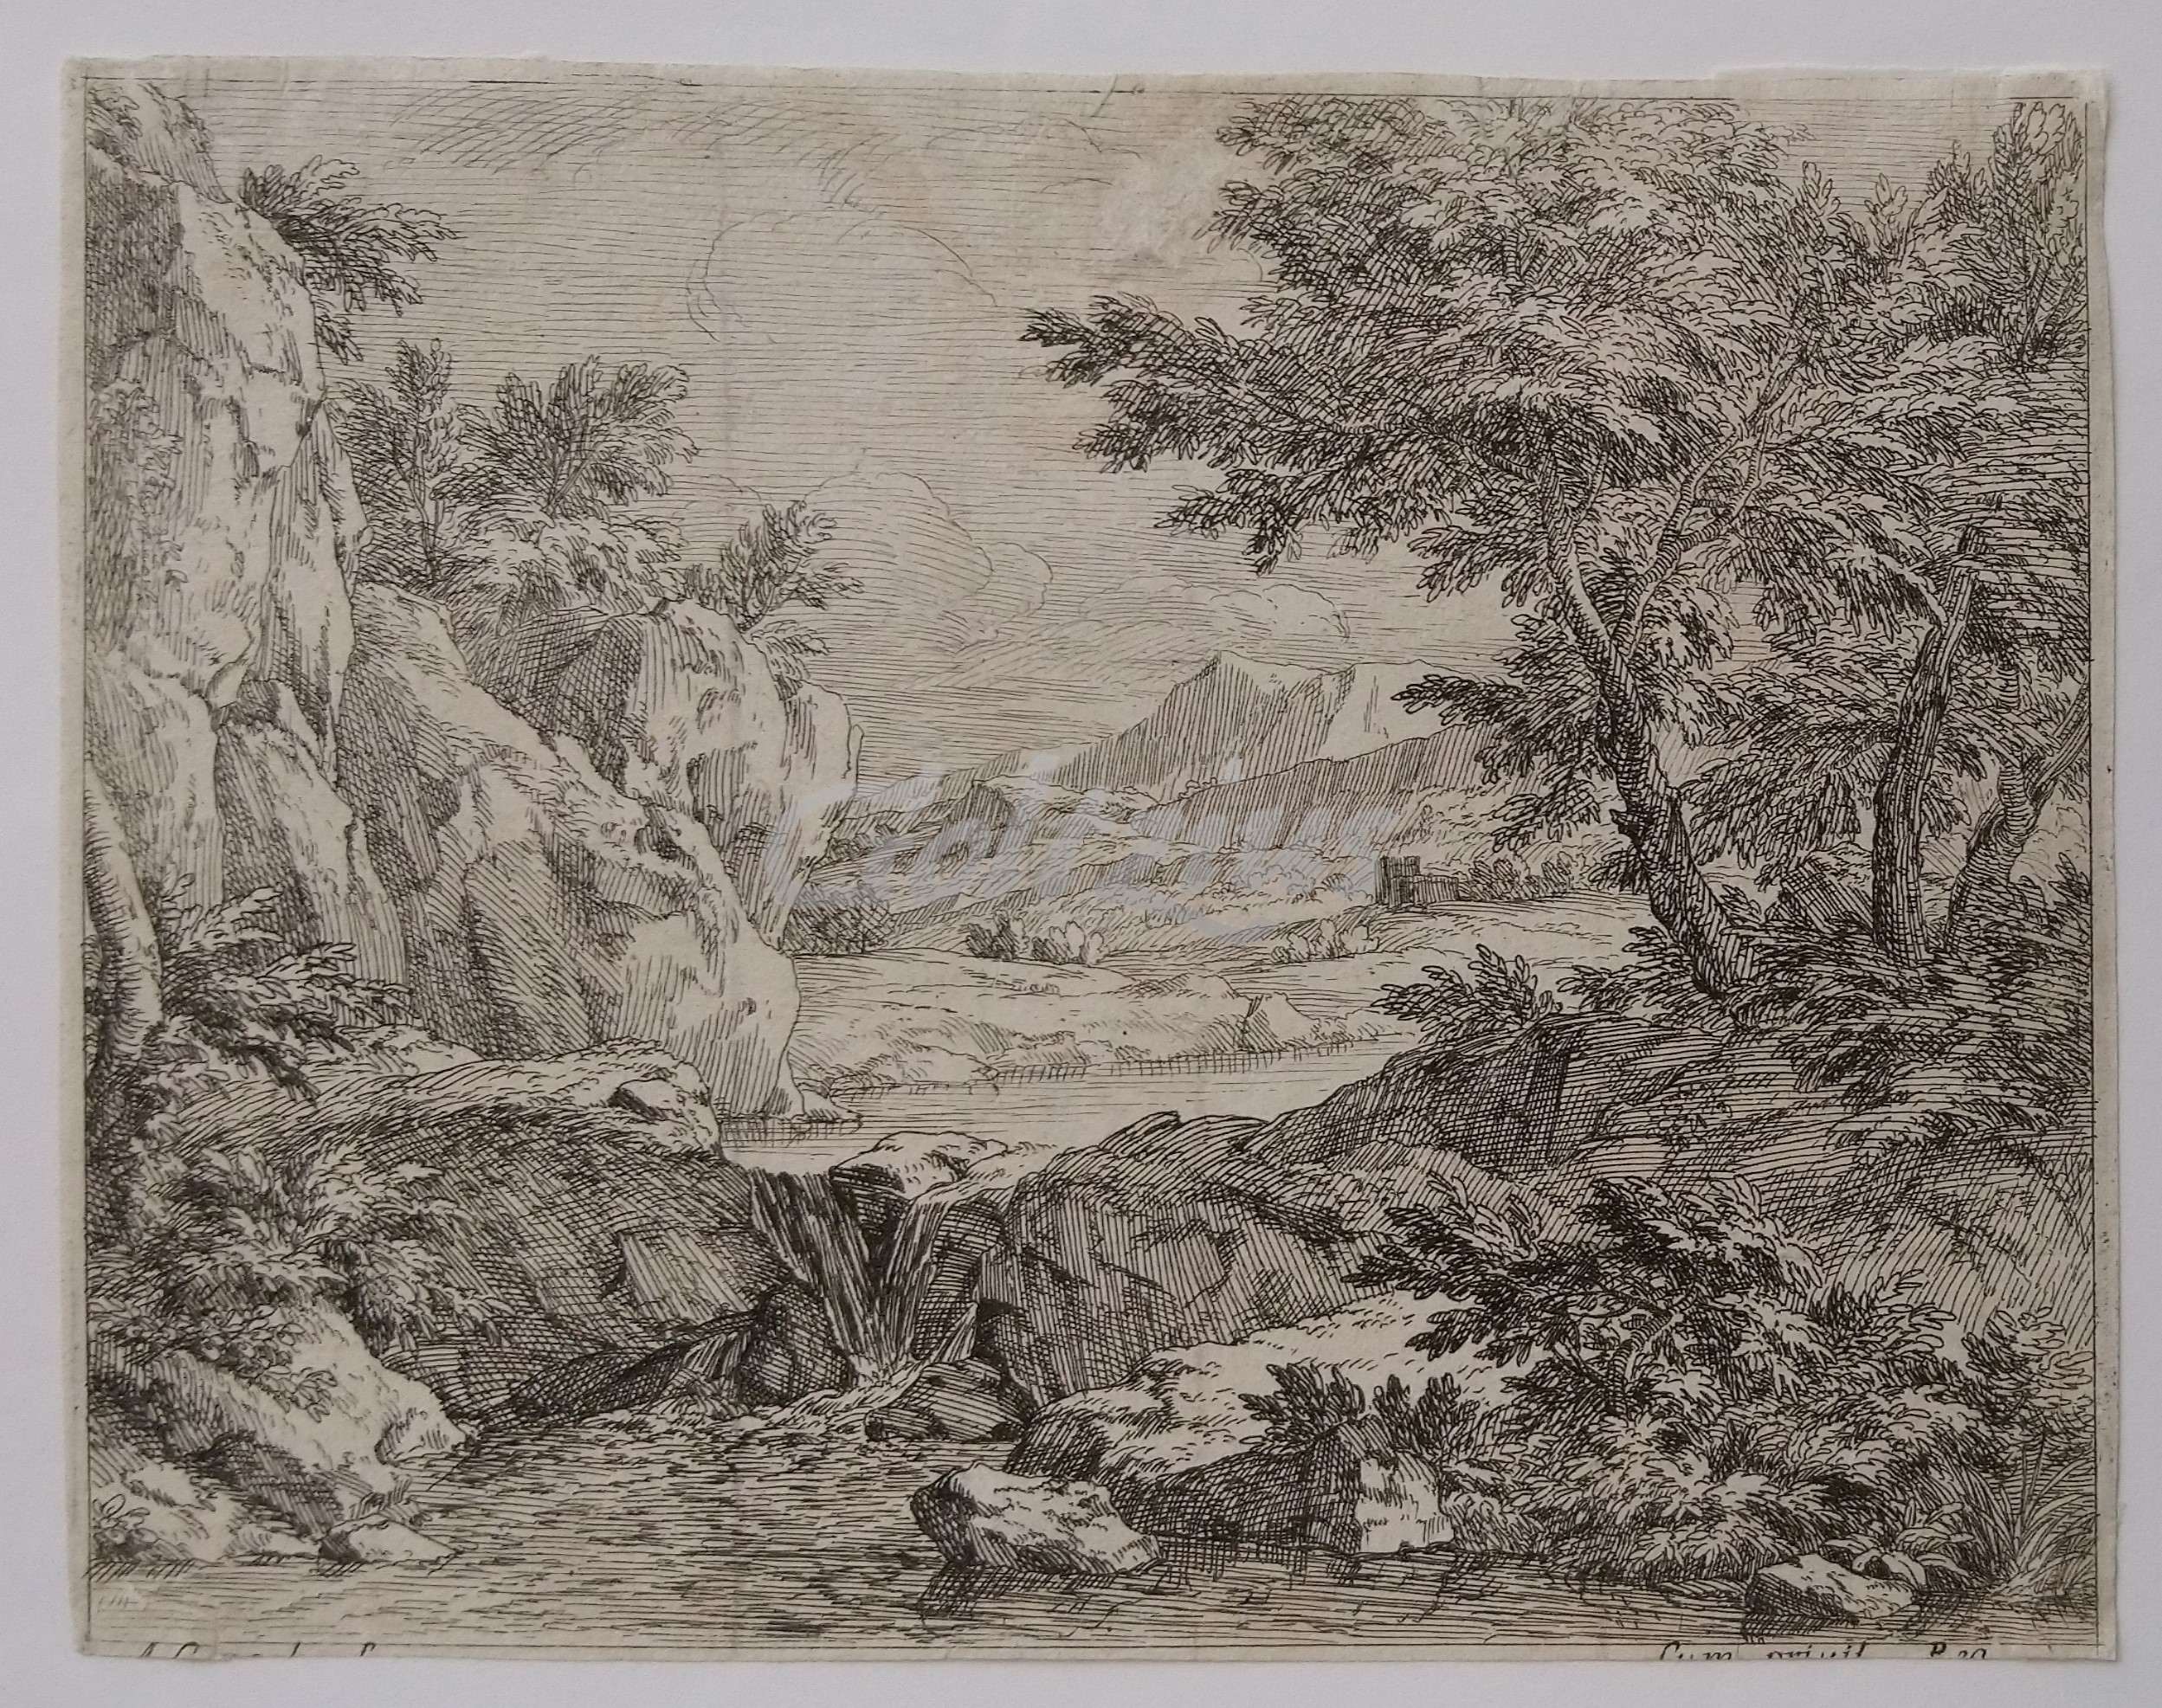 GENOELS, ABRAHAM, Landscape with waterfall